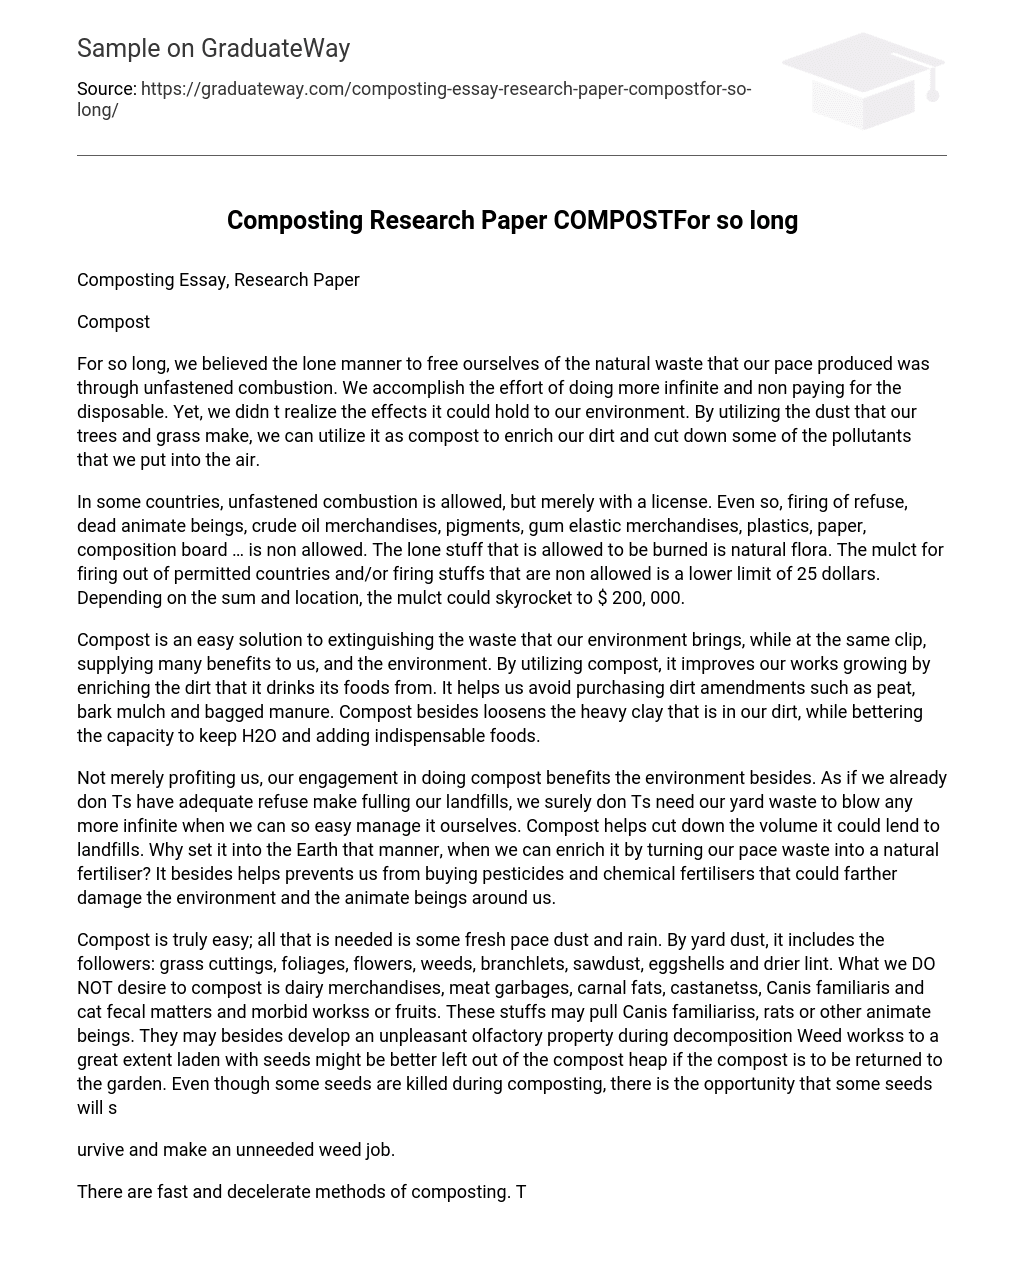 Composting Research Paper COMPOSTFor so long